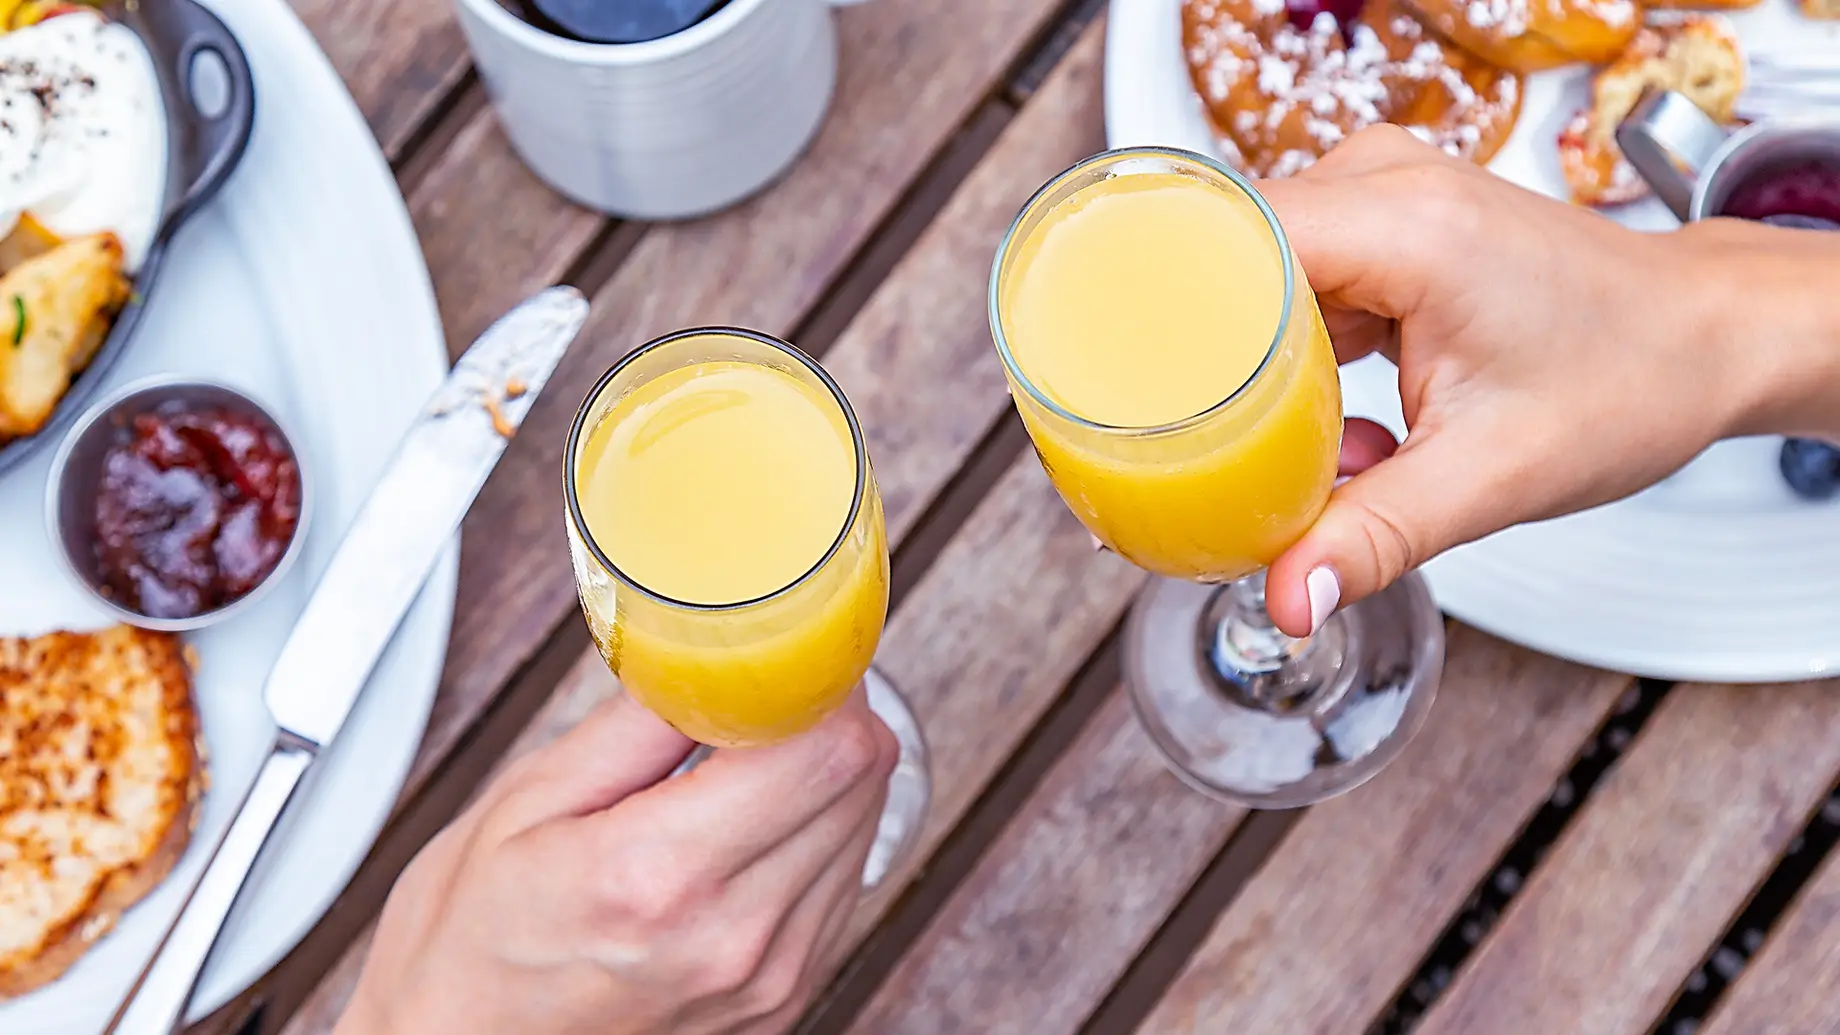 Say What Now? Bay Area Restaurants Offering Bottomless Mimosas to Charge ‘Vomit Fees’